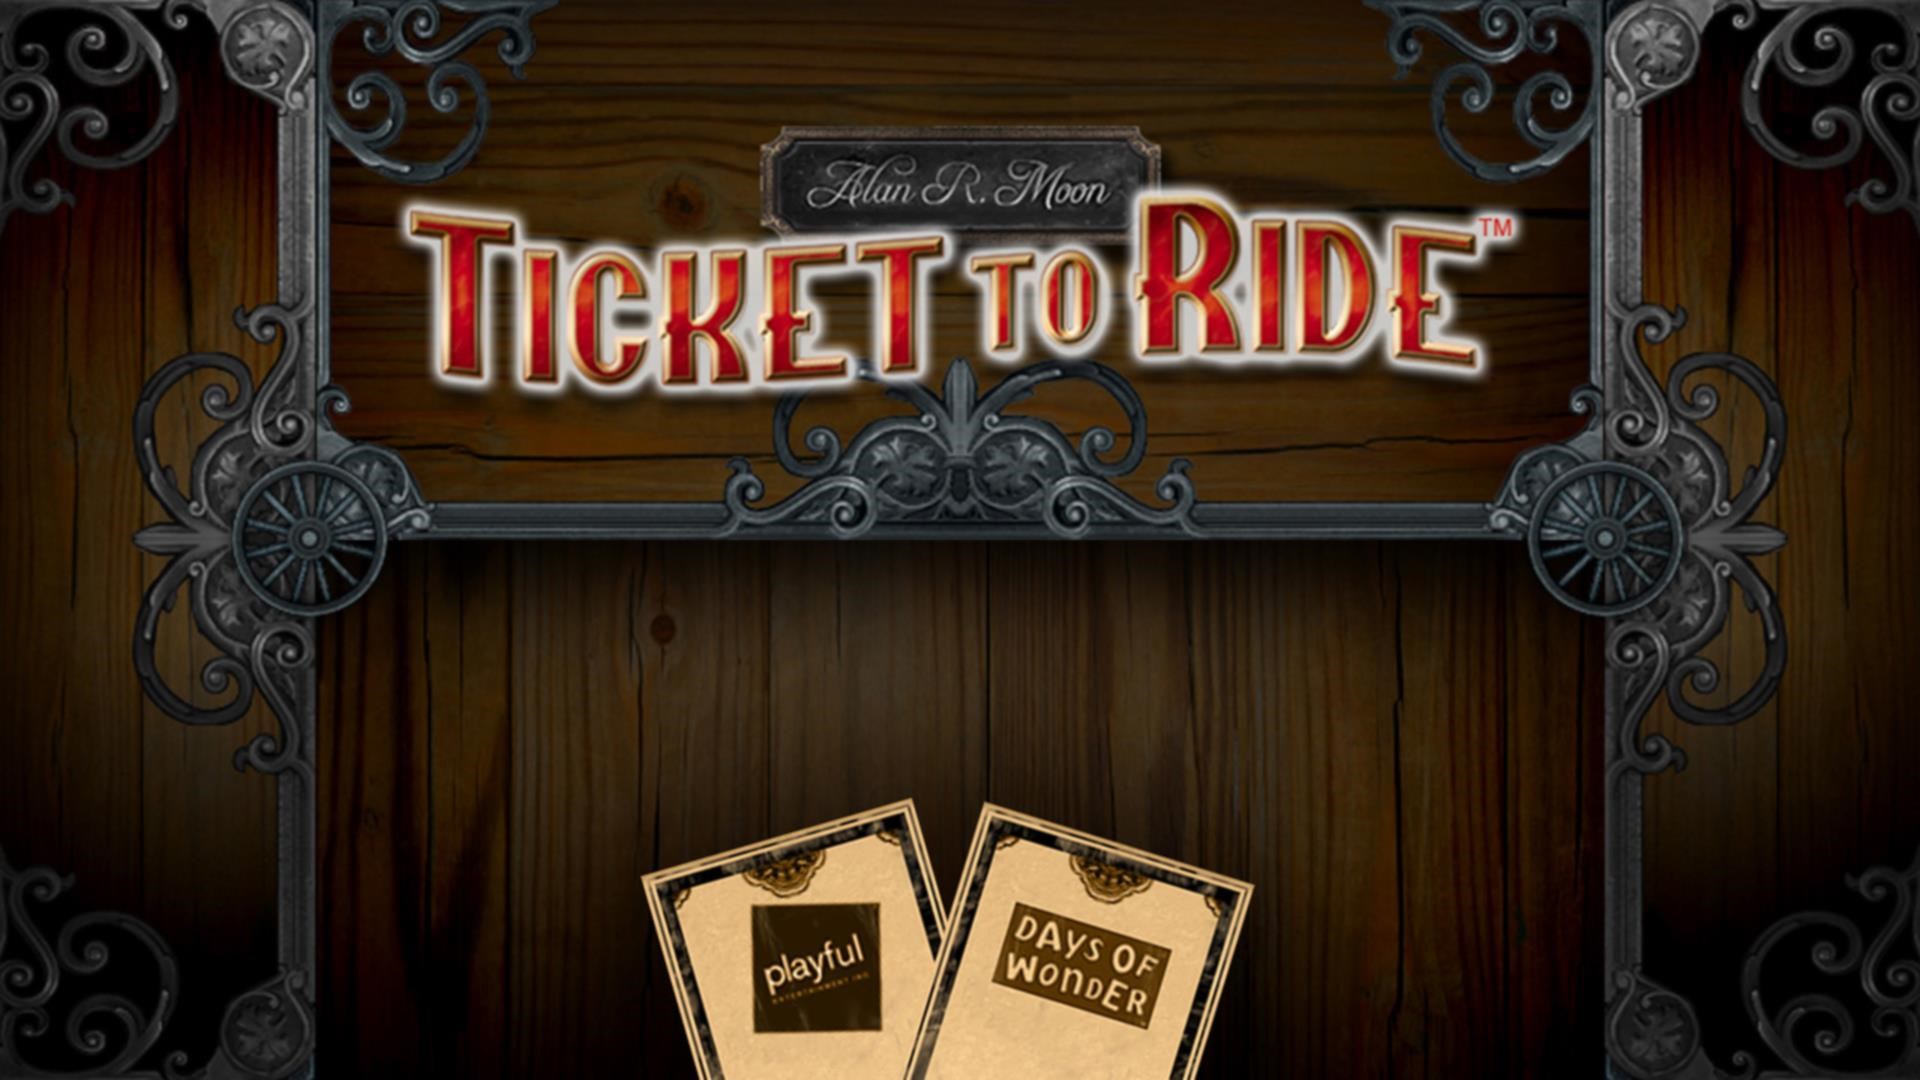 song facts ticket ro ride